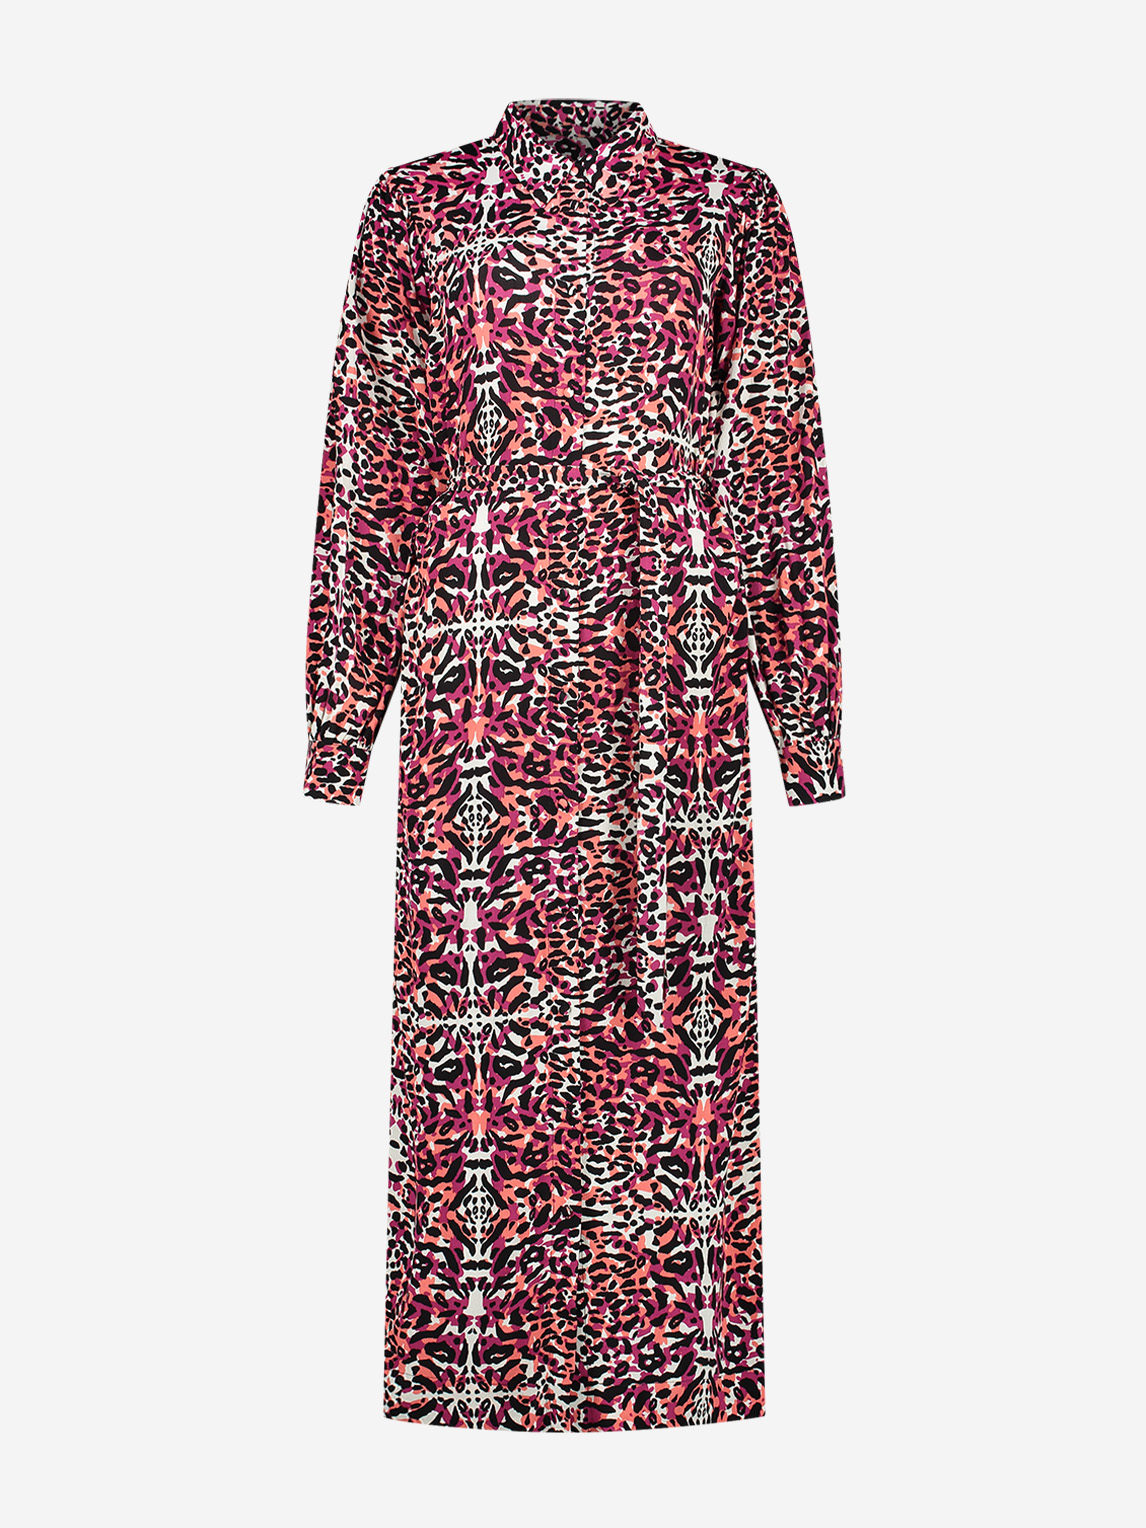 Animal print maxi Dress with wide sleeves 